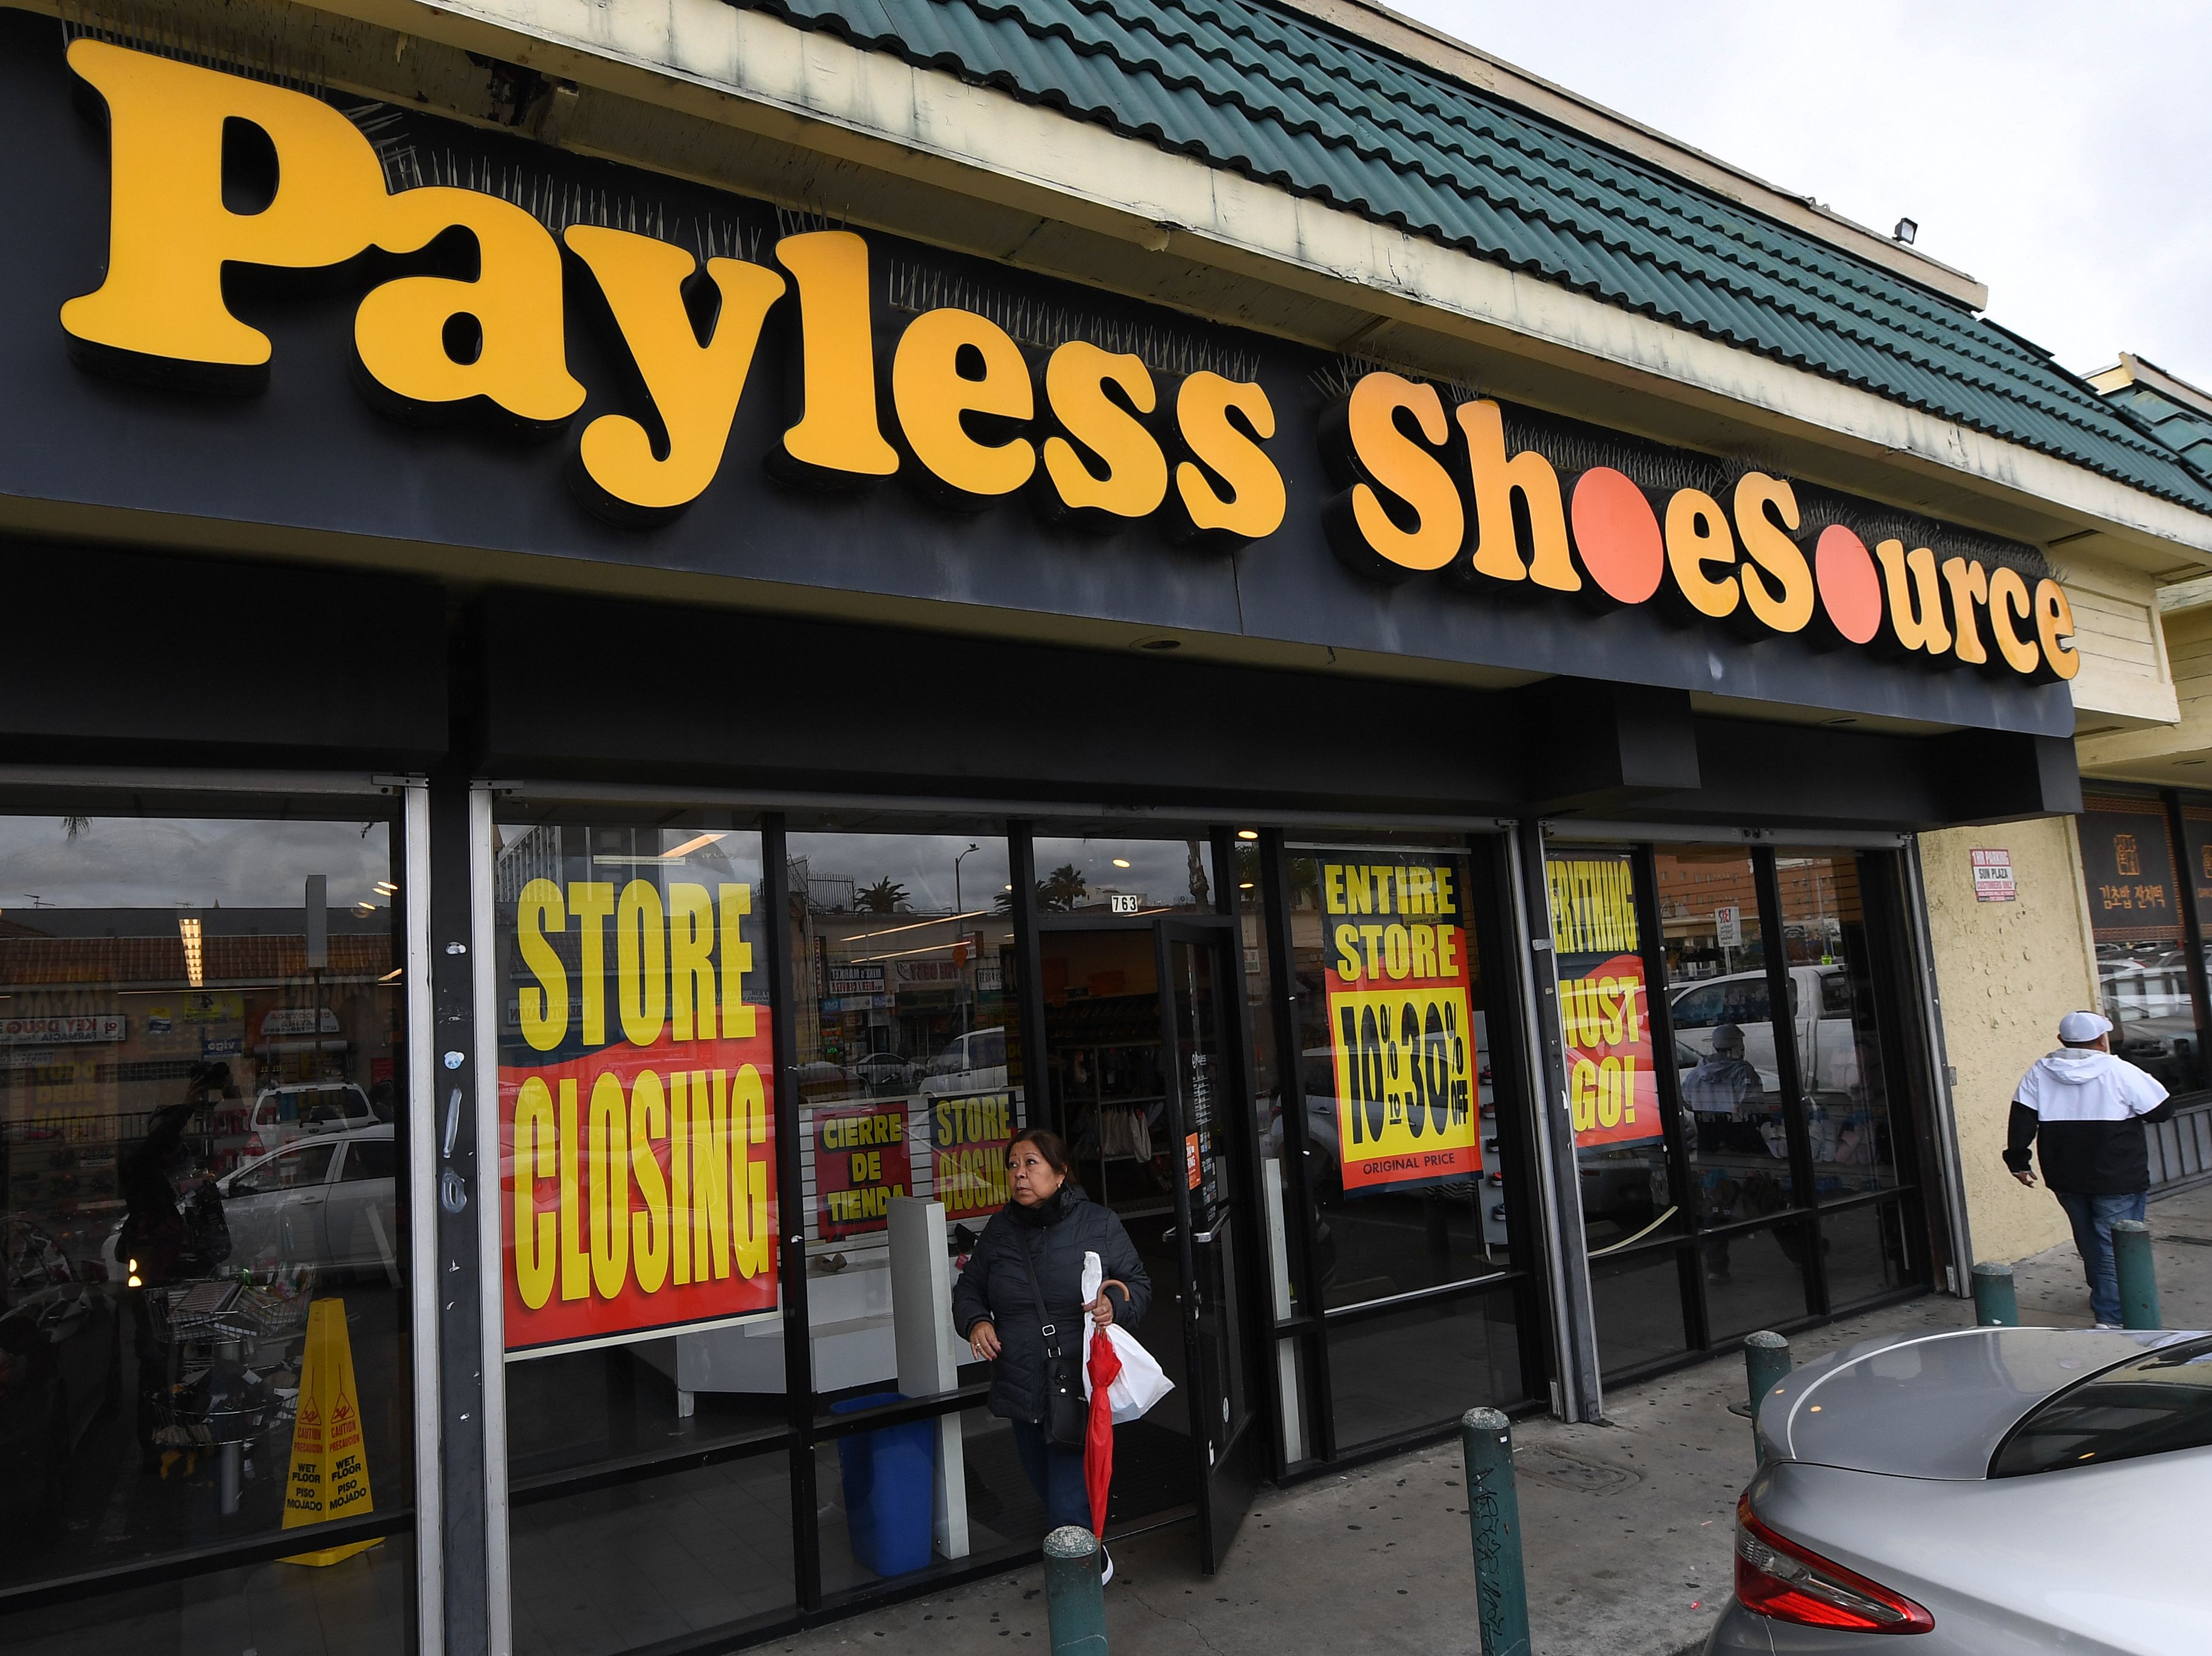 20% off Clearance Shoes at Payless.com!!!